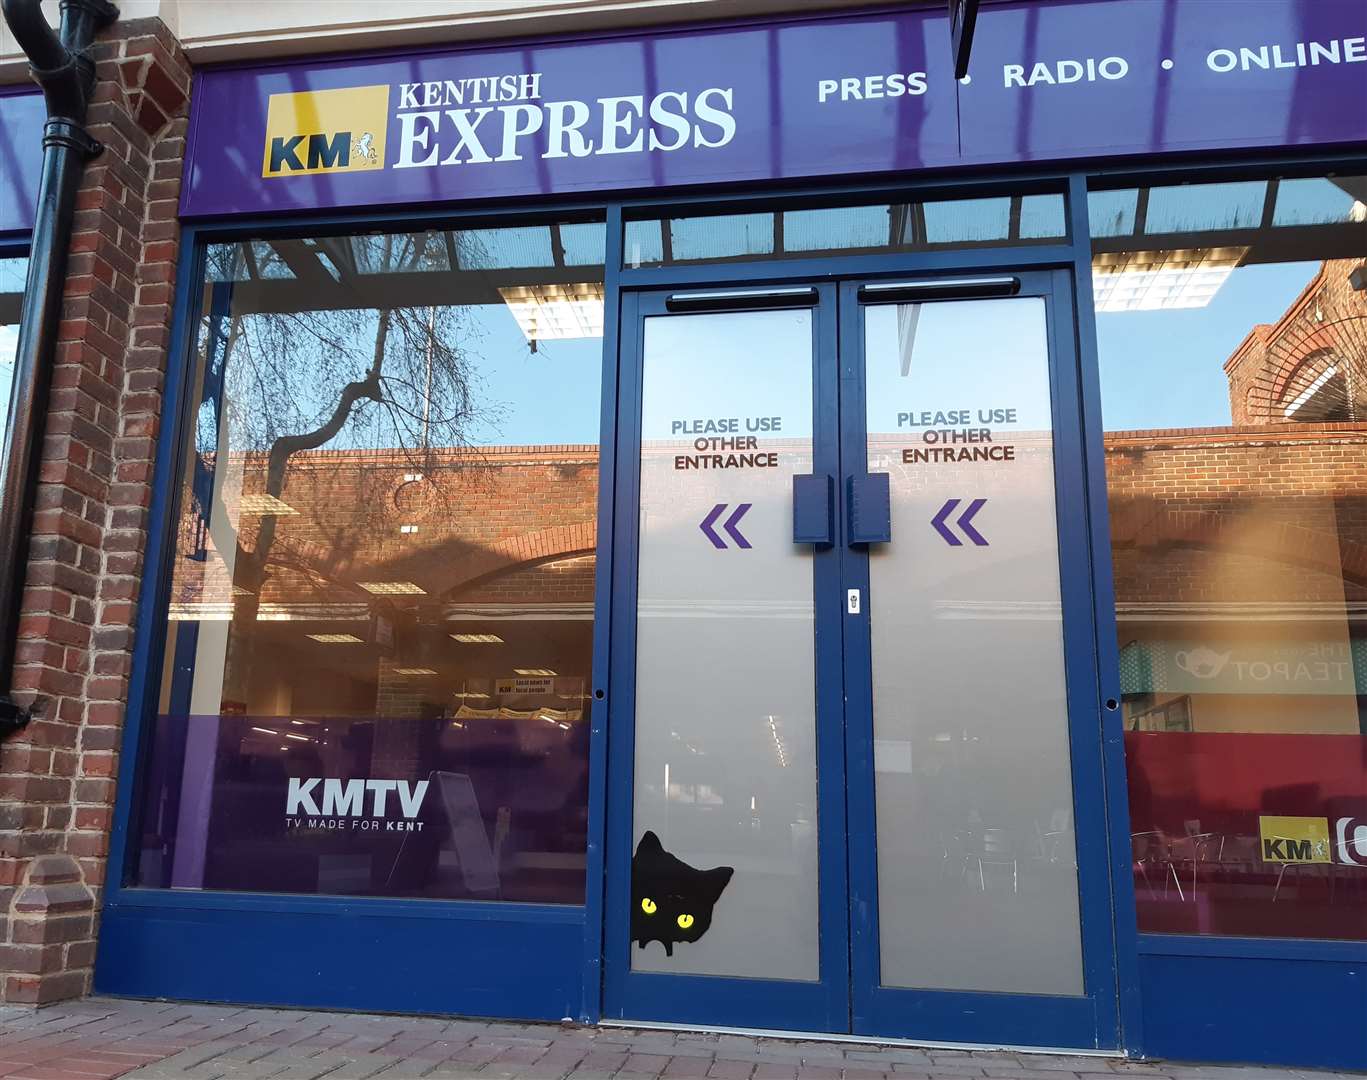 The cat has appeared on the Kentish Express office